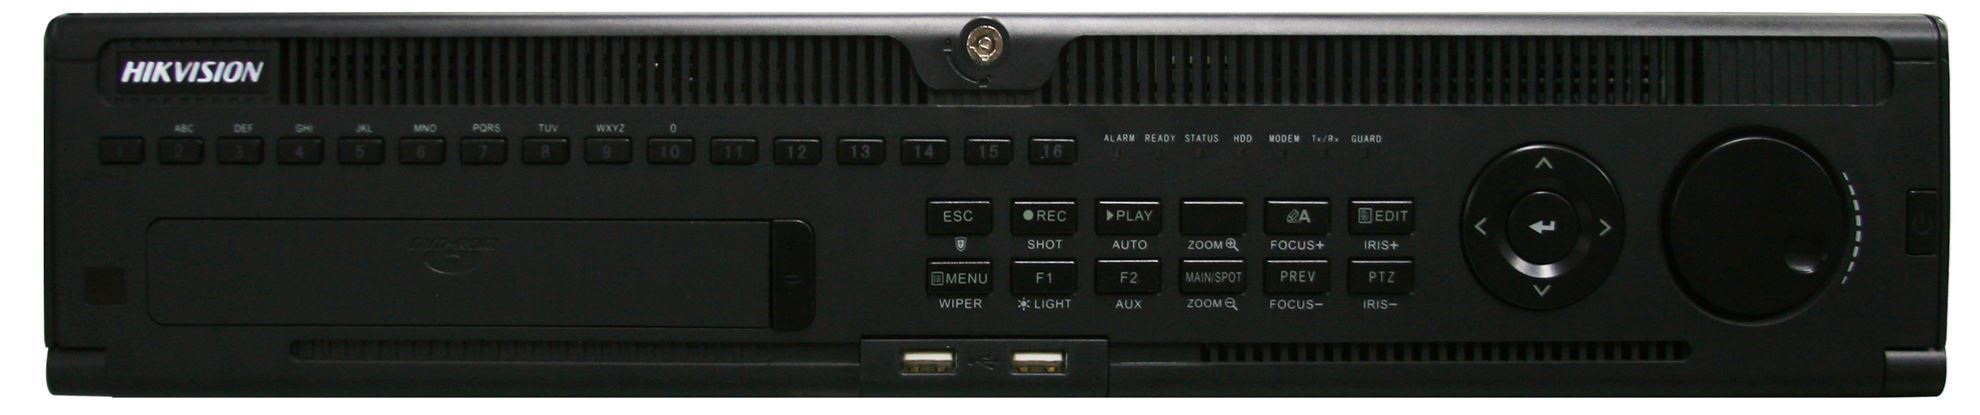 HIKVISION 64 Channel 4K NVR - NO HDD. 2-3 Working Days Lead Time.